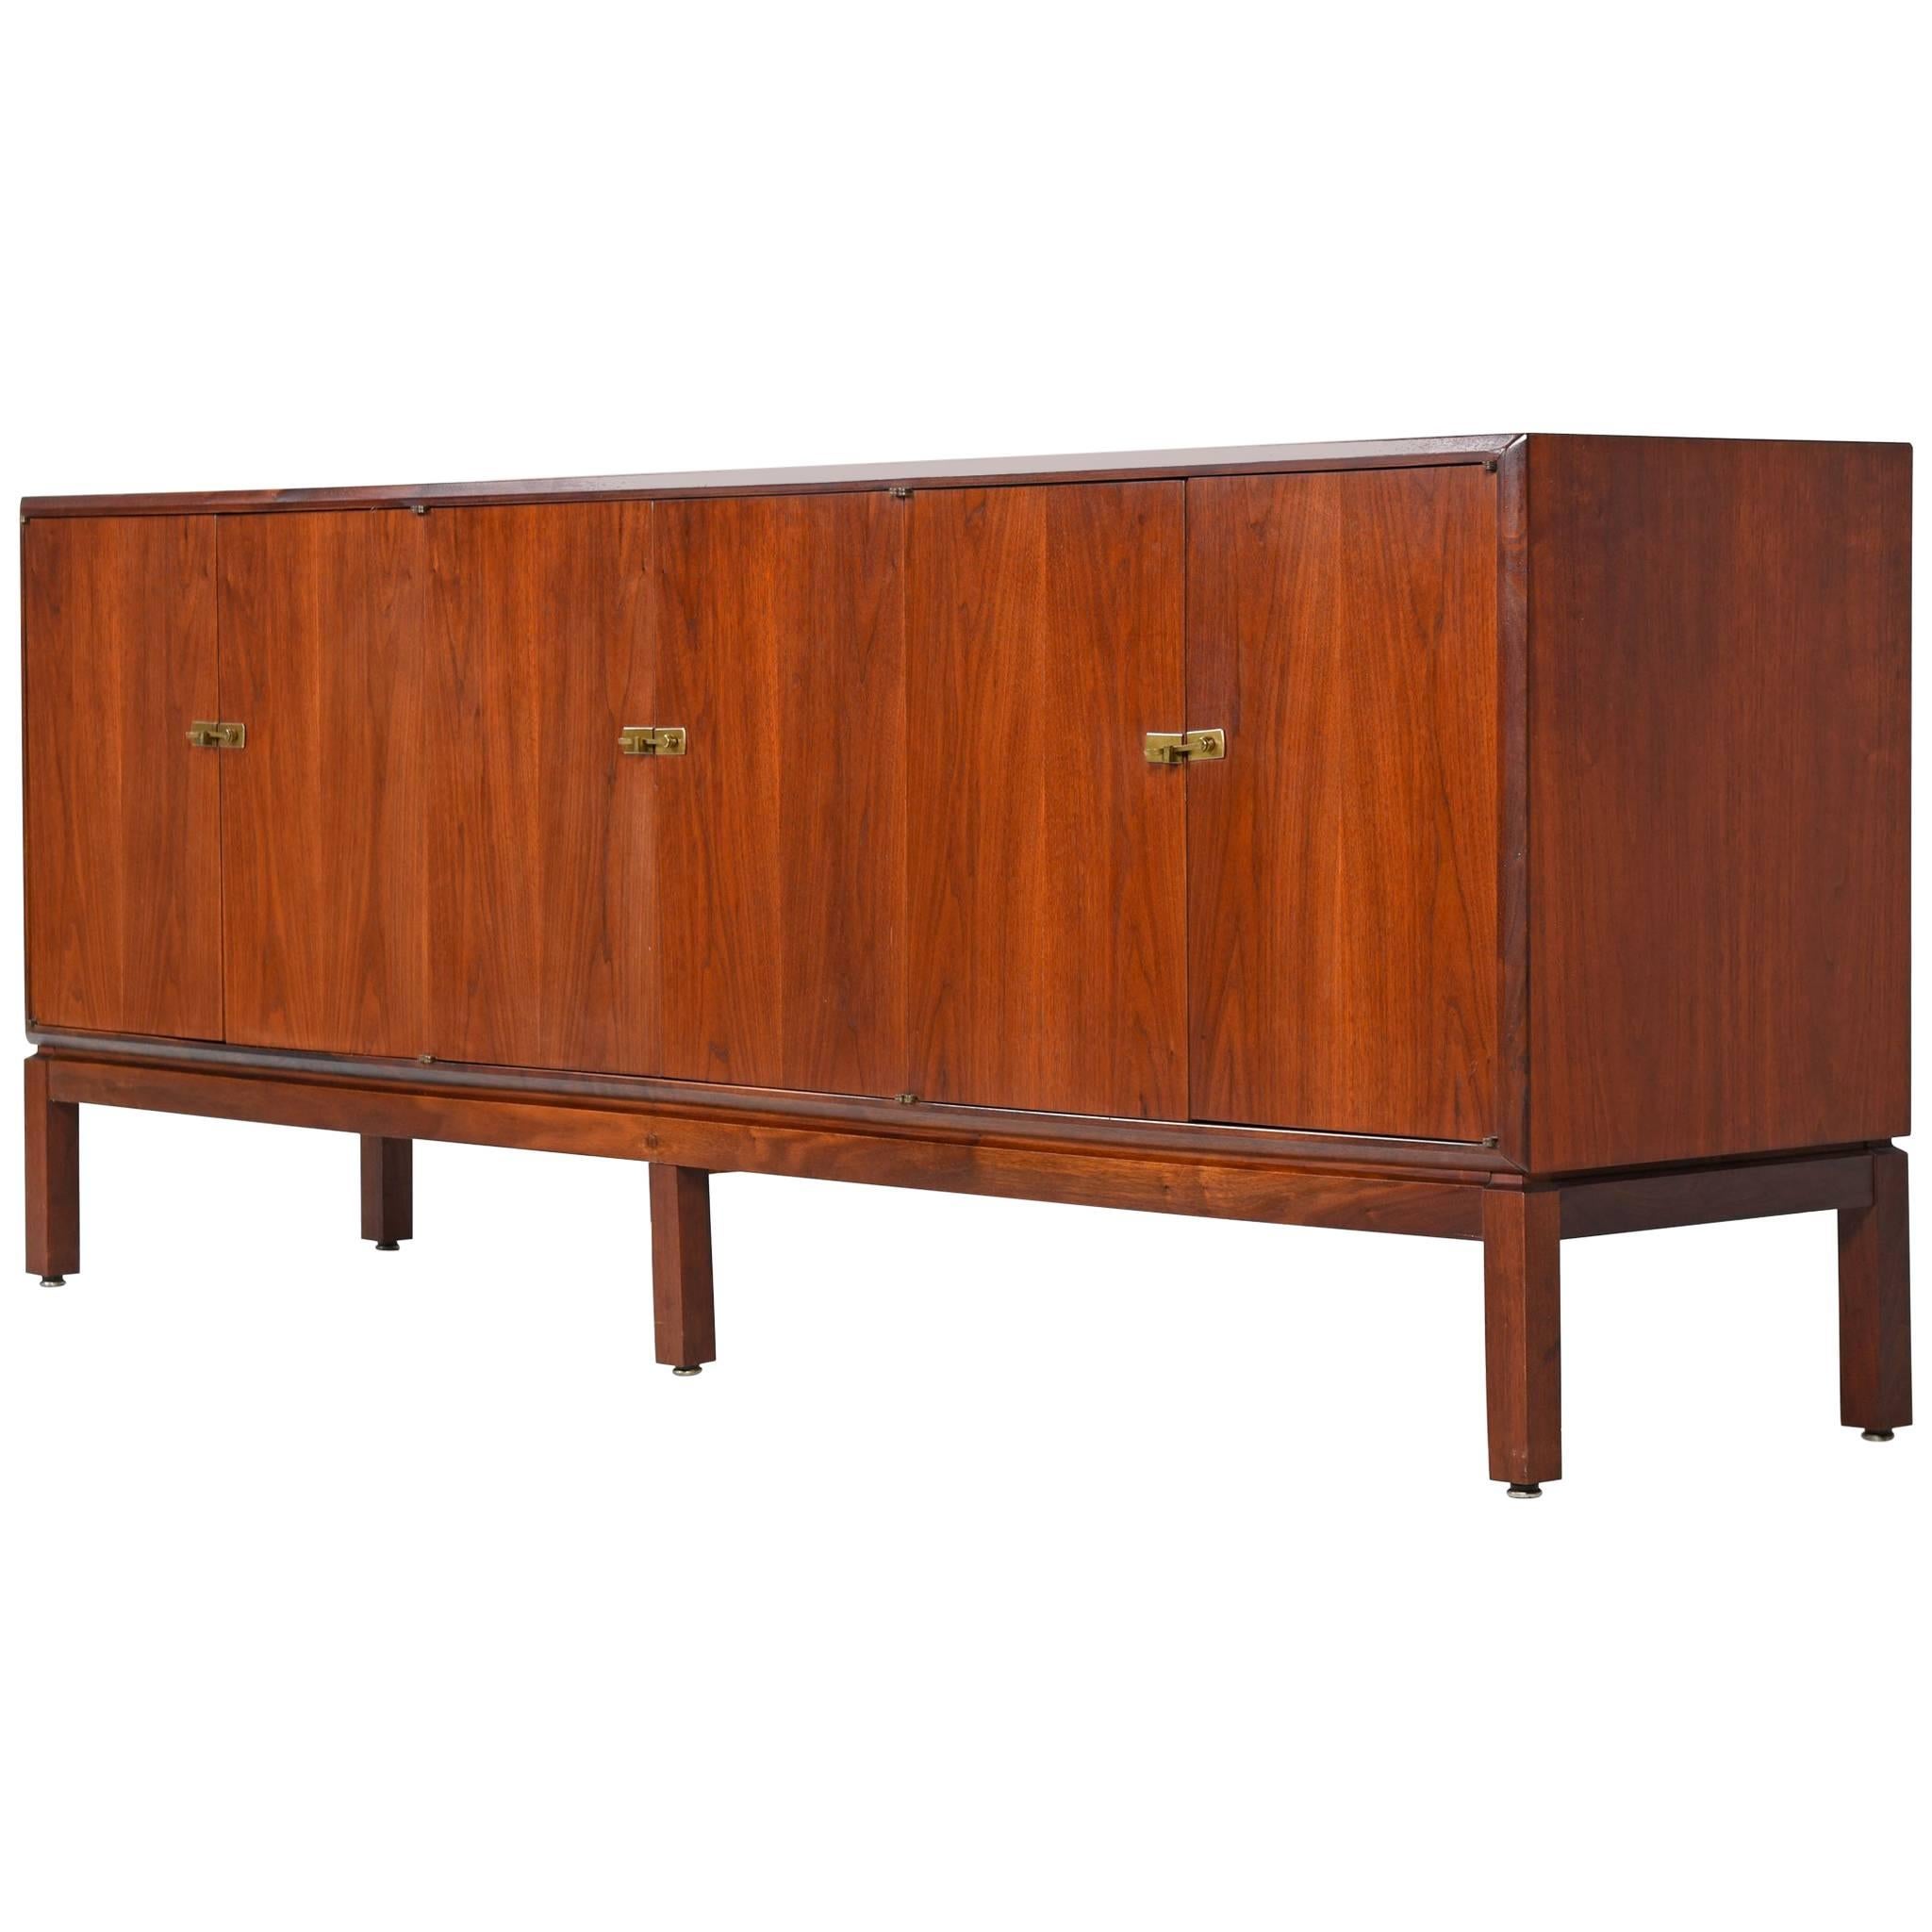 Foster-McDavid Style Walnut Credenza with Brass Latches, 1960s